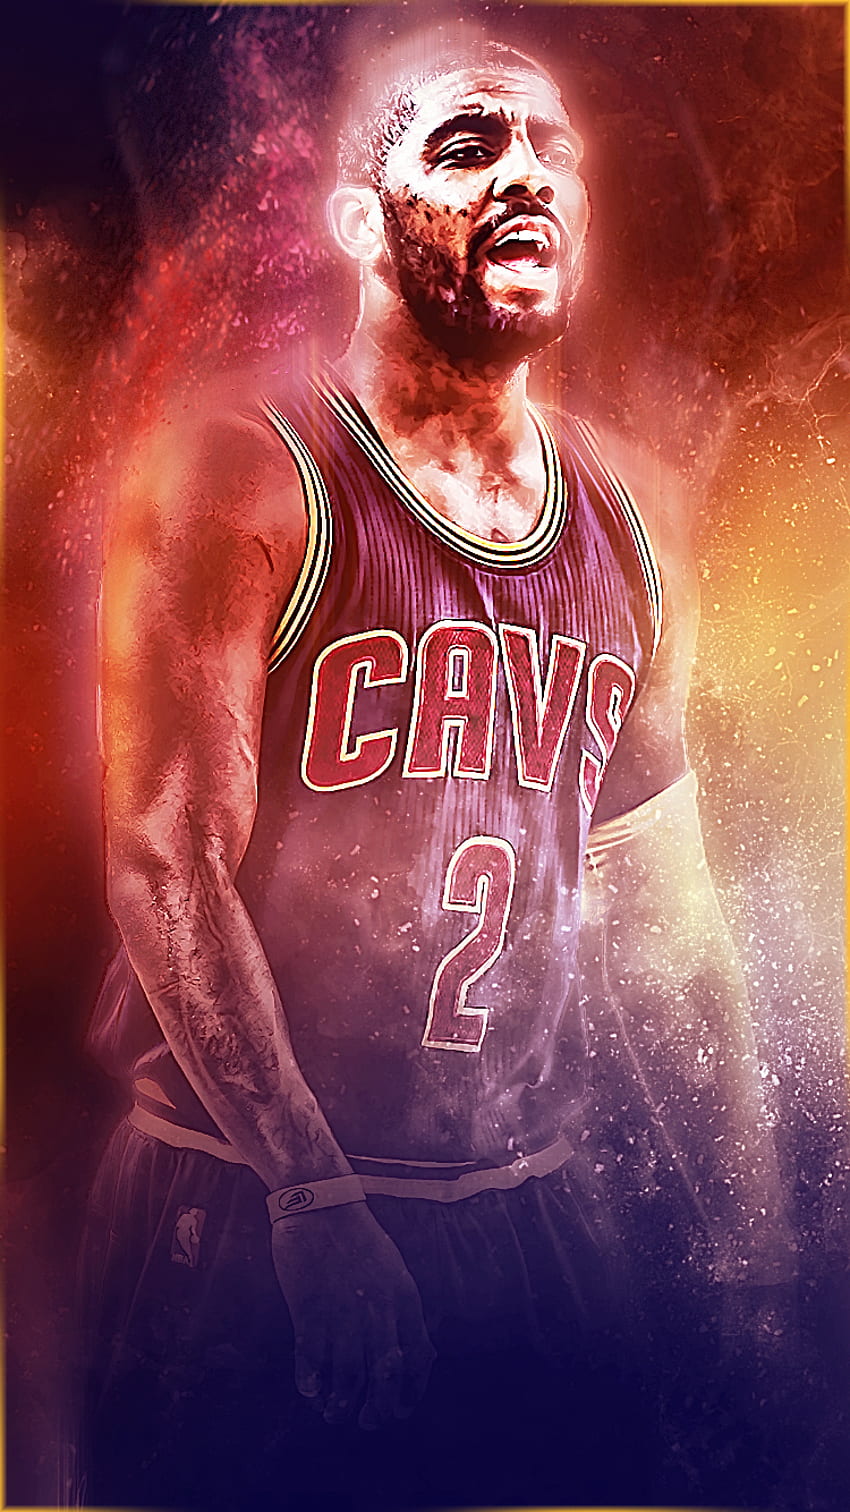 Kyrie Irving NBA Wallpaper 40 by skythlee on DeviantArt